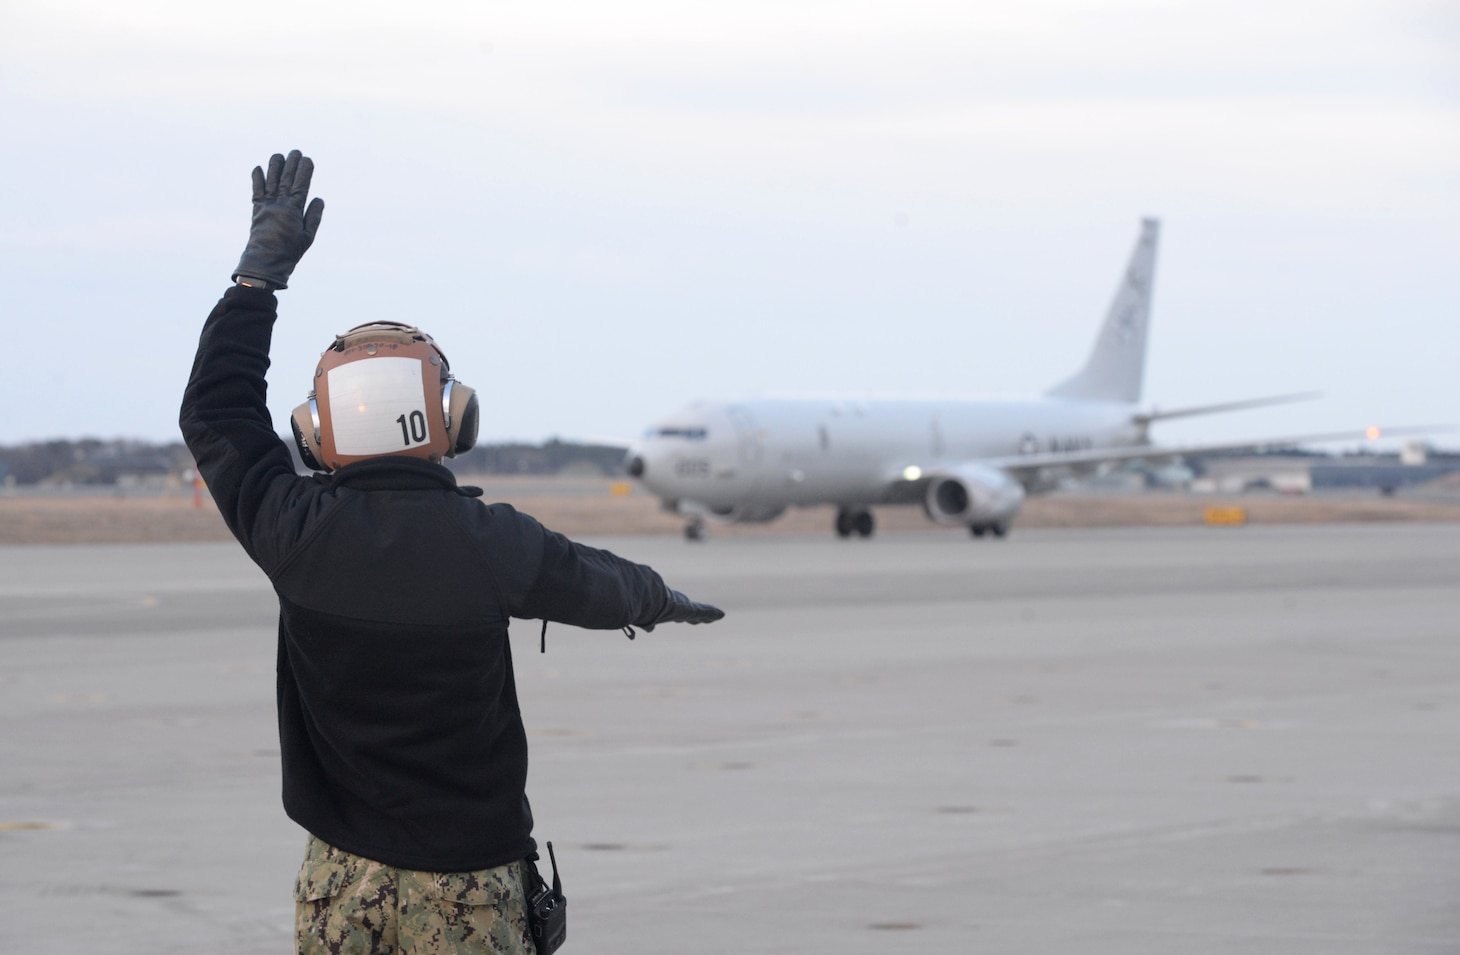 MISAWA, Japan (April 10, 2019) Aviation Maintenance Administrationman Airman Roy Vega directs a P-8A Poseidon aircraft assigned to the “Fighting Tigers” of Patrol Squadron (VP) 8, on the flight line of Misawa Air Base after a Search and Rescue mission for a missing Japanese F-35 fighter jet Pilot. VP-8 is deployed to the U.S. 7th Fleet (C7F) area of operations conducting maritime patrol and reconnaissance operations in support of Commander, Task Force 72, C7F, and U.S. Pacific Command objectives throughout the Indo-Asia Pacific region.